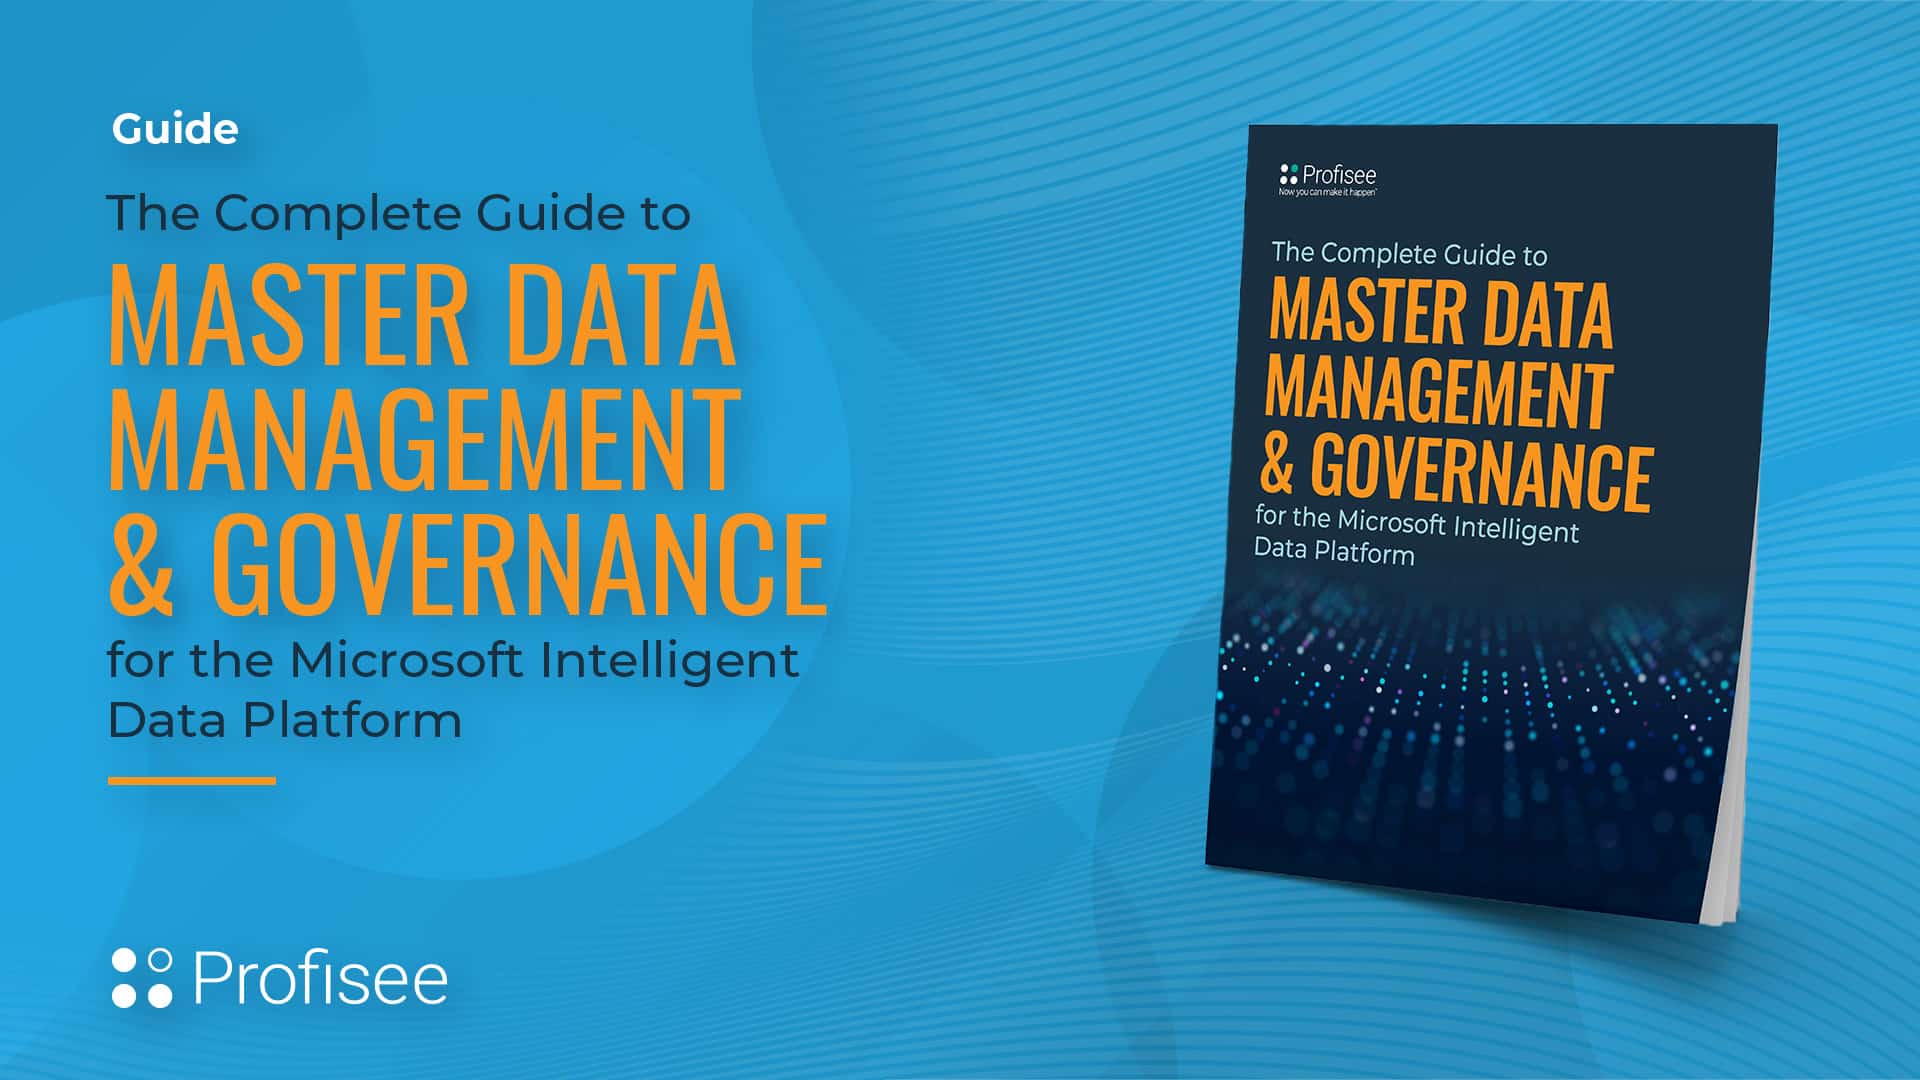 Image for "The Complete Guide to Governance and MDM in Azure" eBook